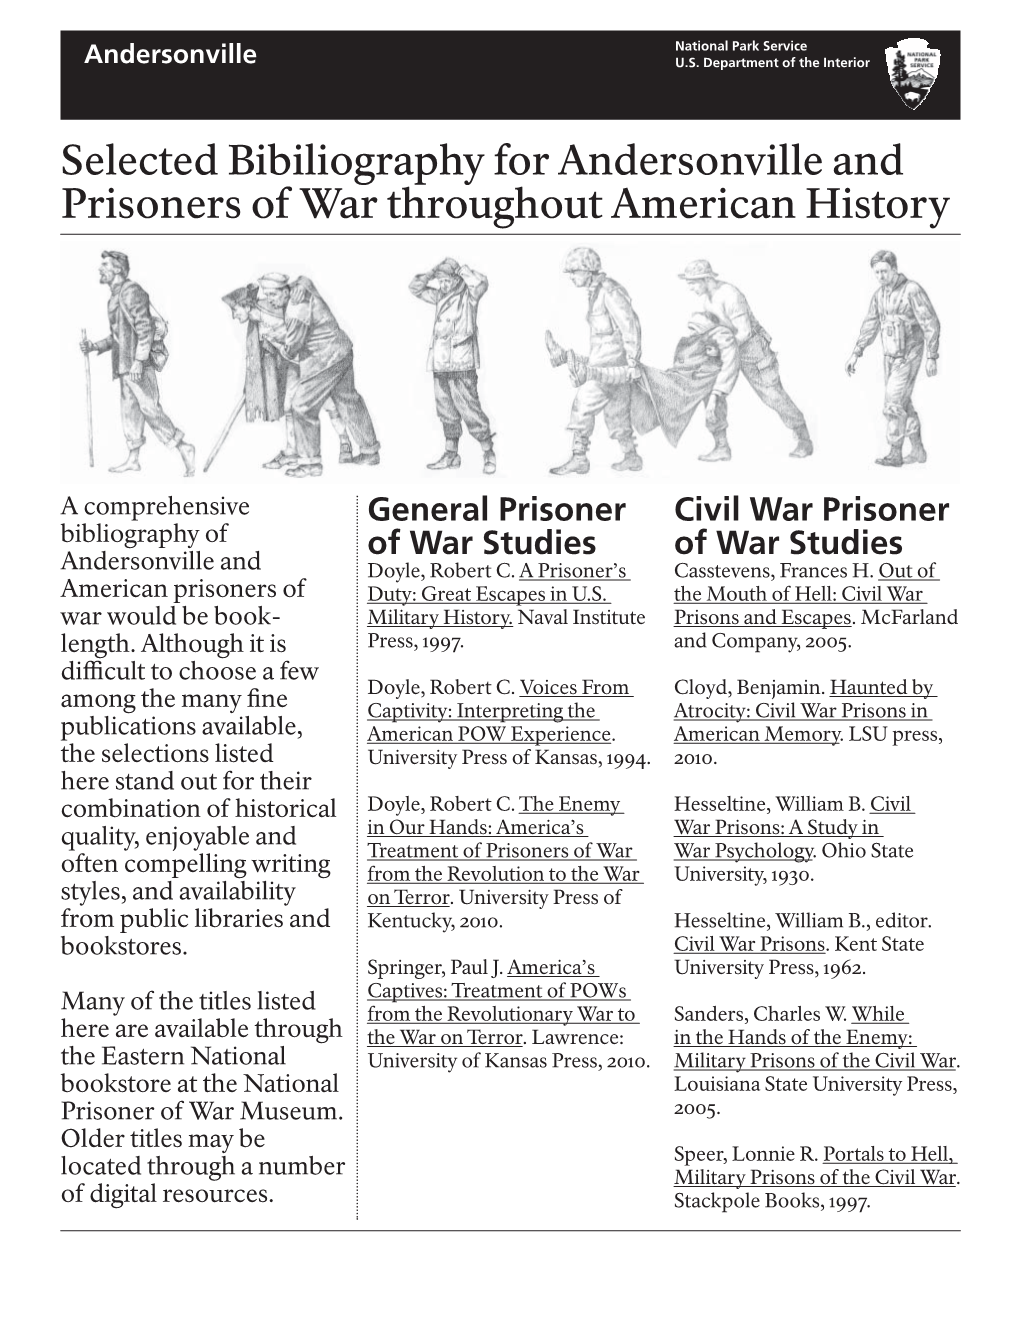 Selected Bibiliography for Andersonville and Prisoners of War Throughout American History